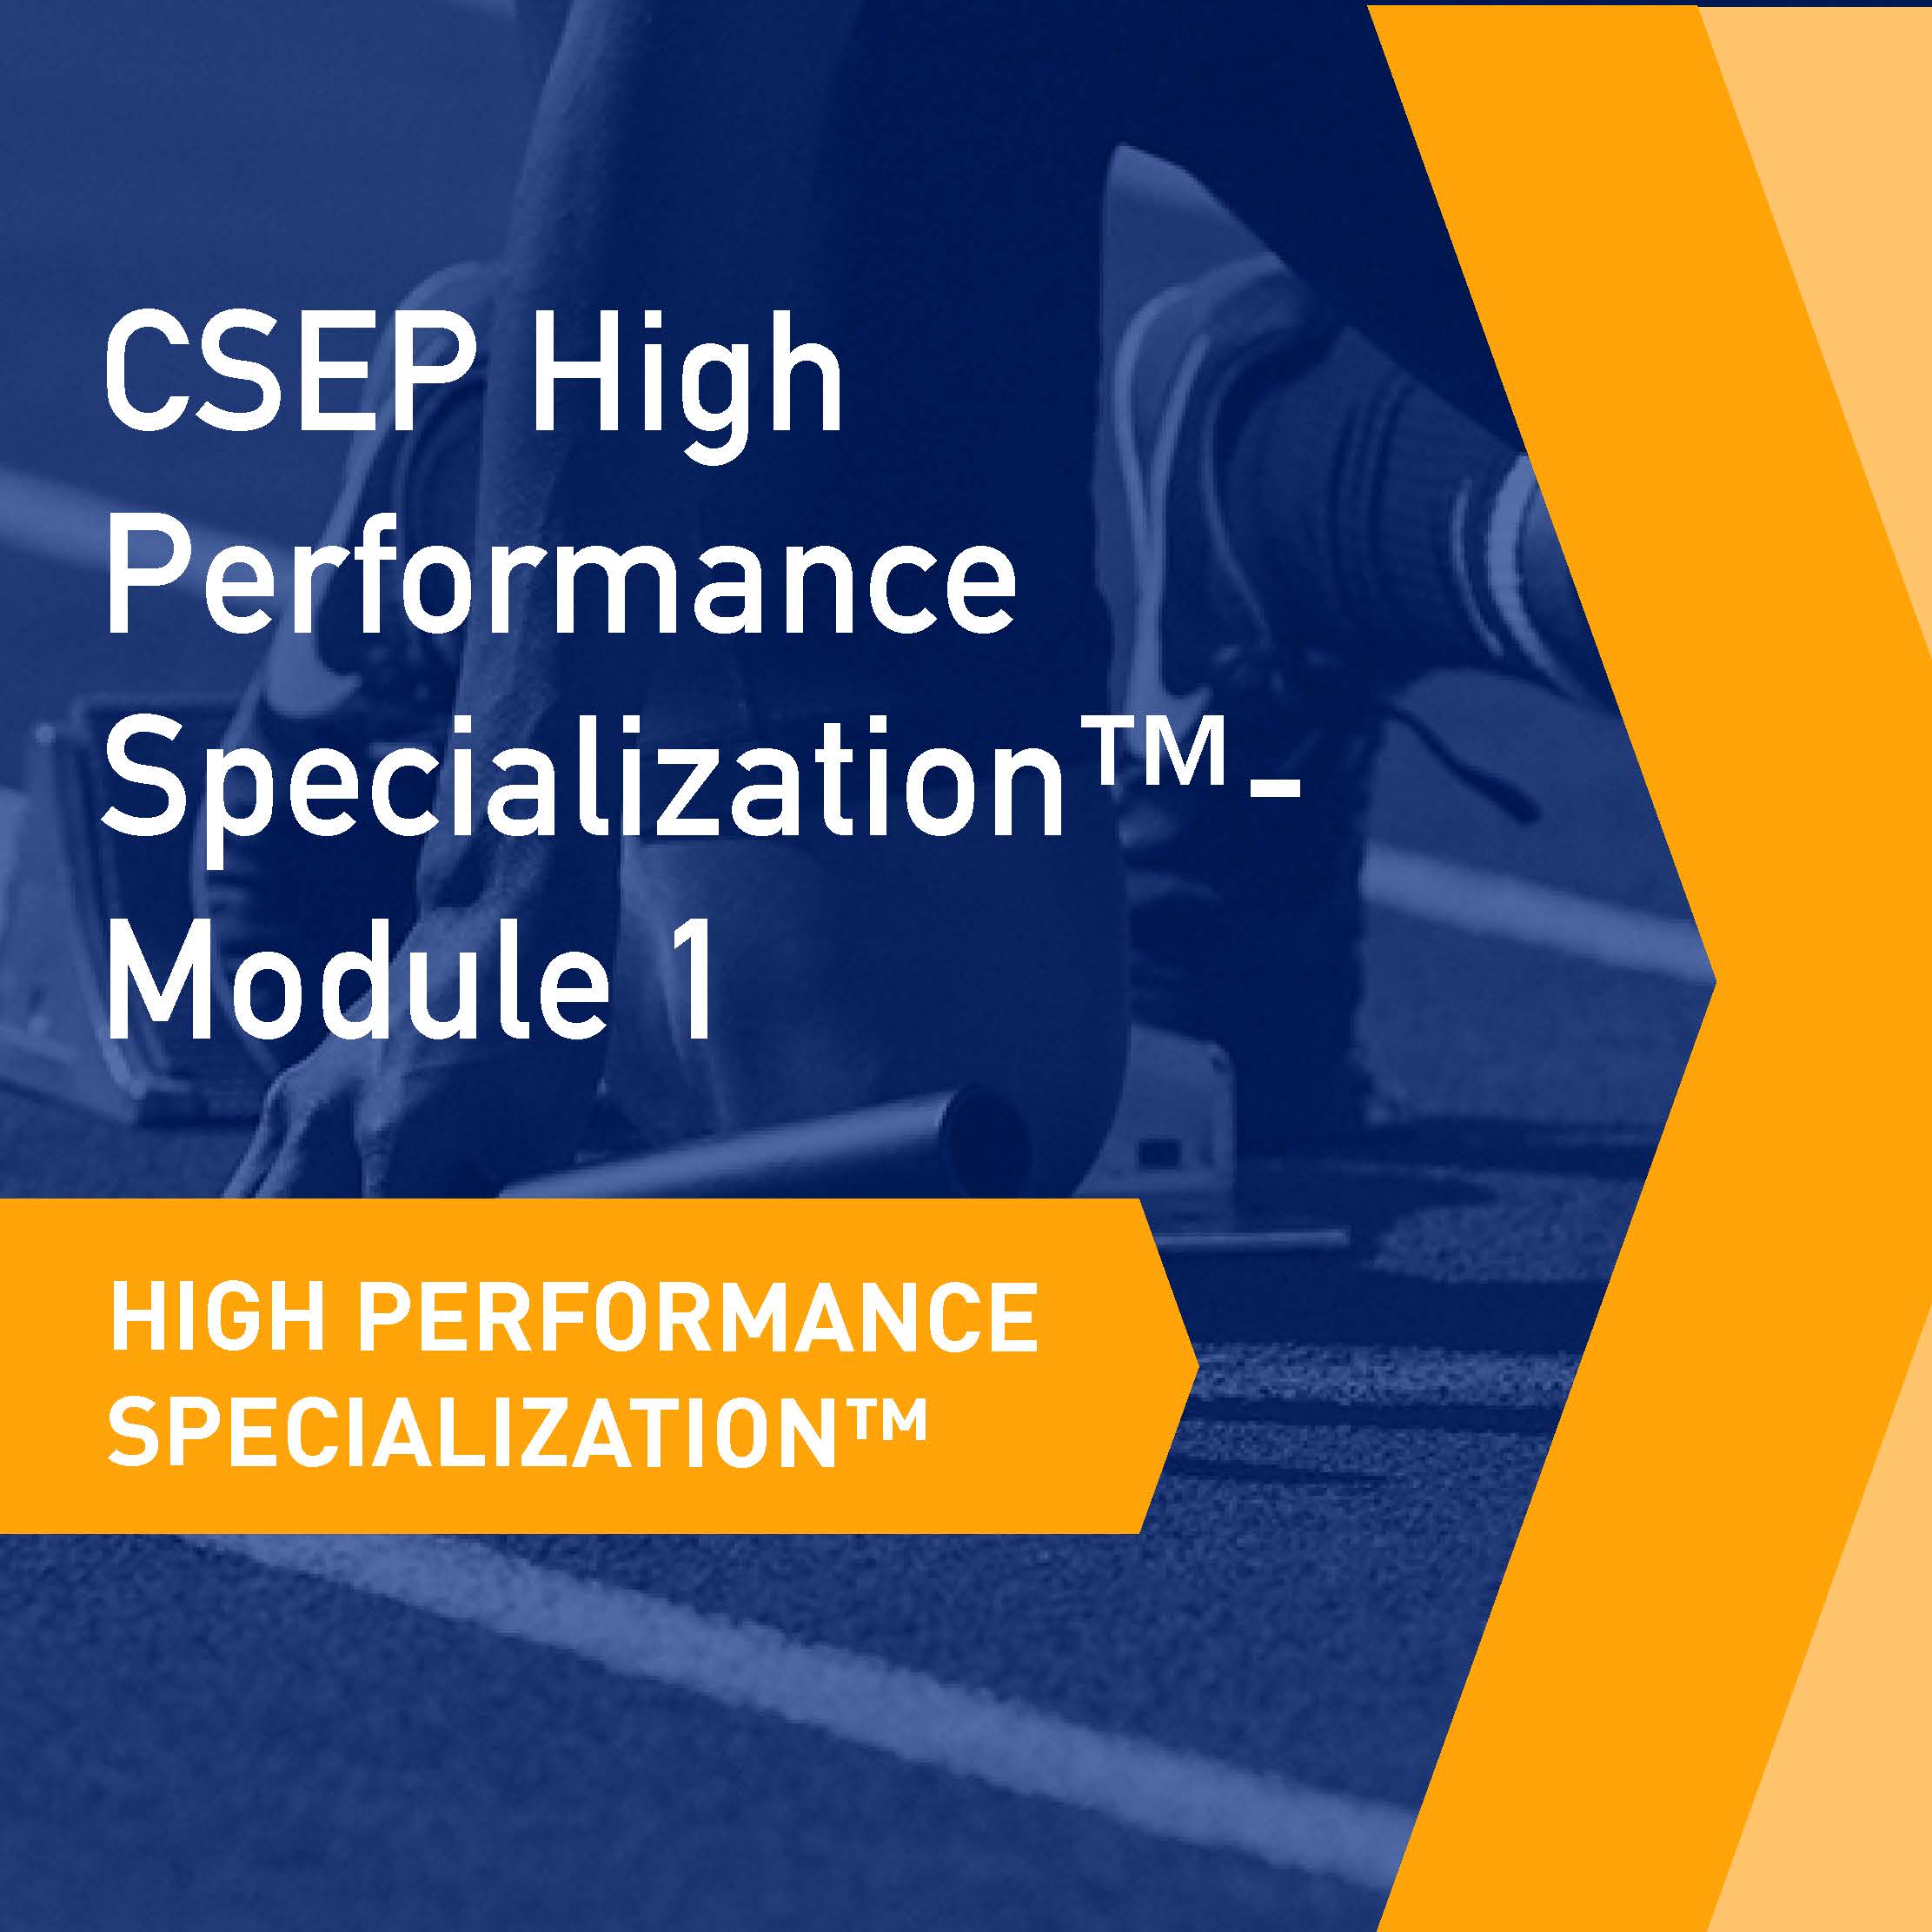 CSEP High Performance Specialization™ - Module 1: Physiology and Training Prescriptions for the Components of Fitness